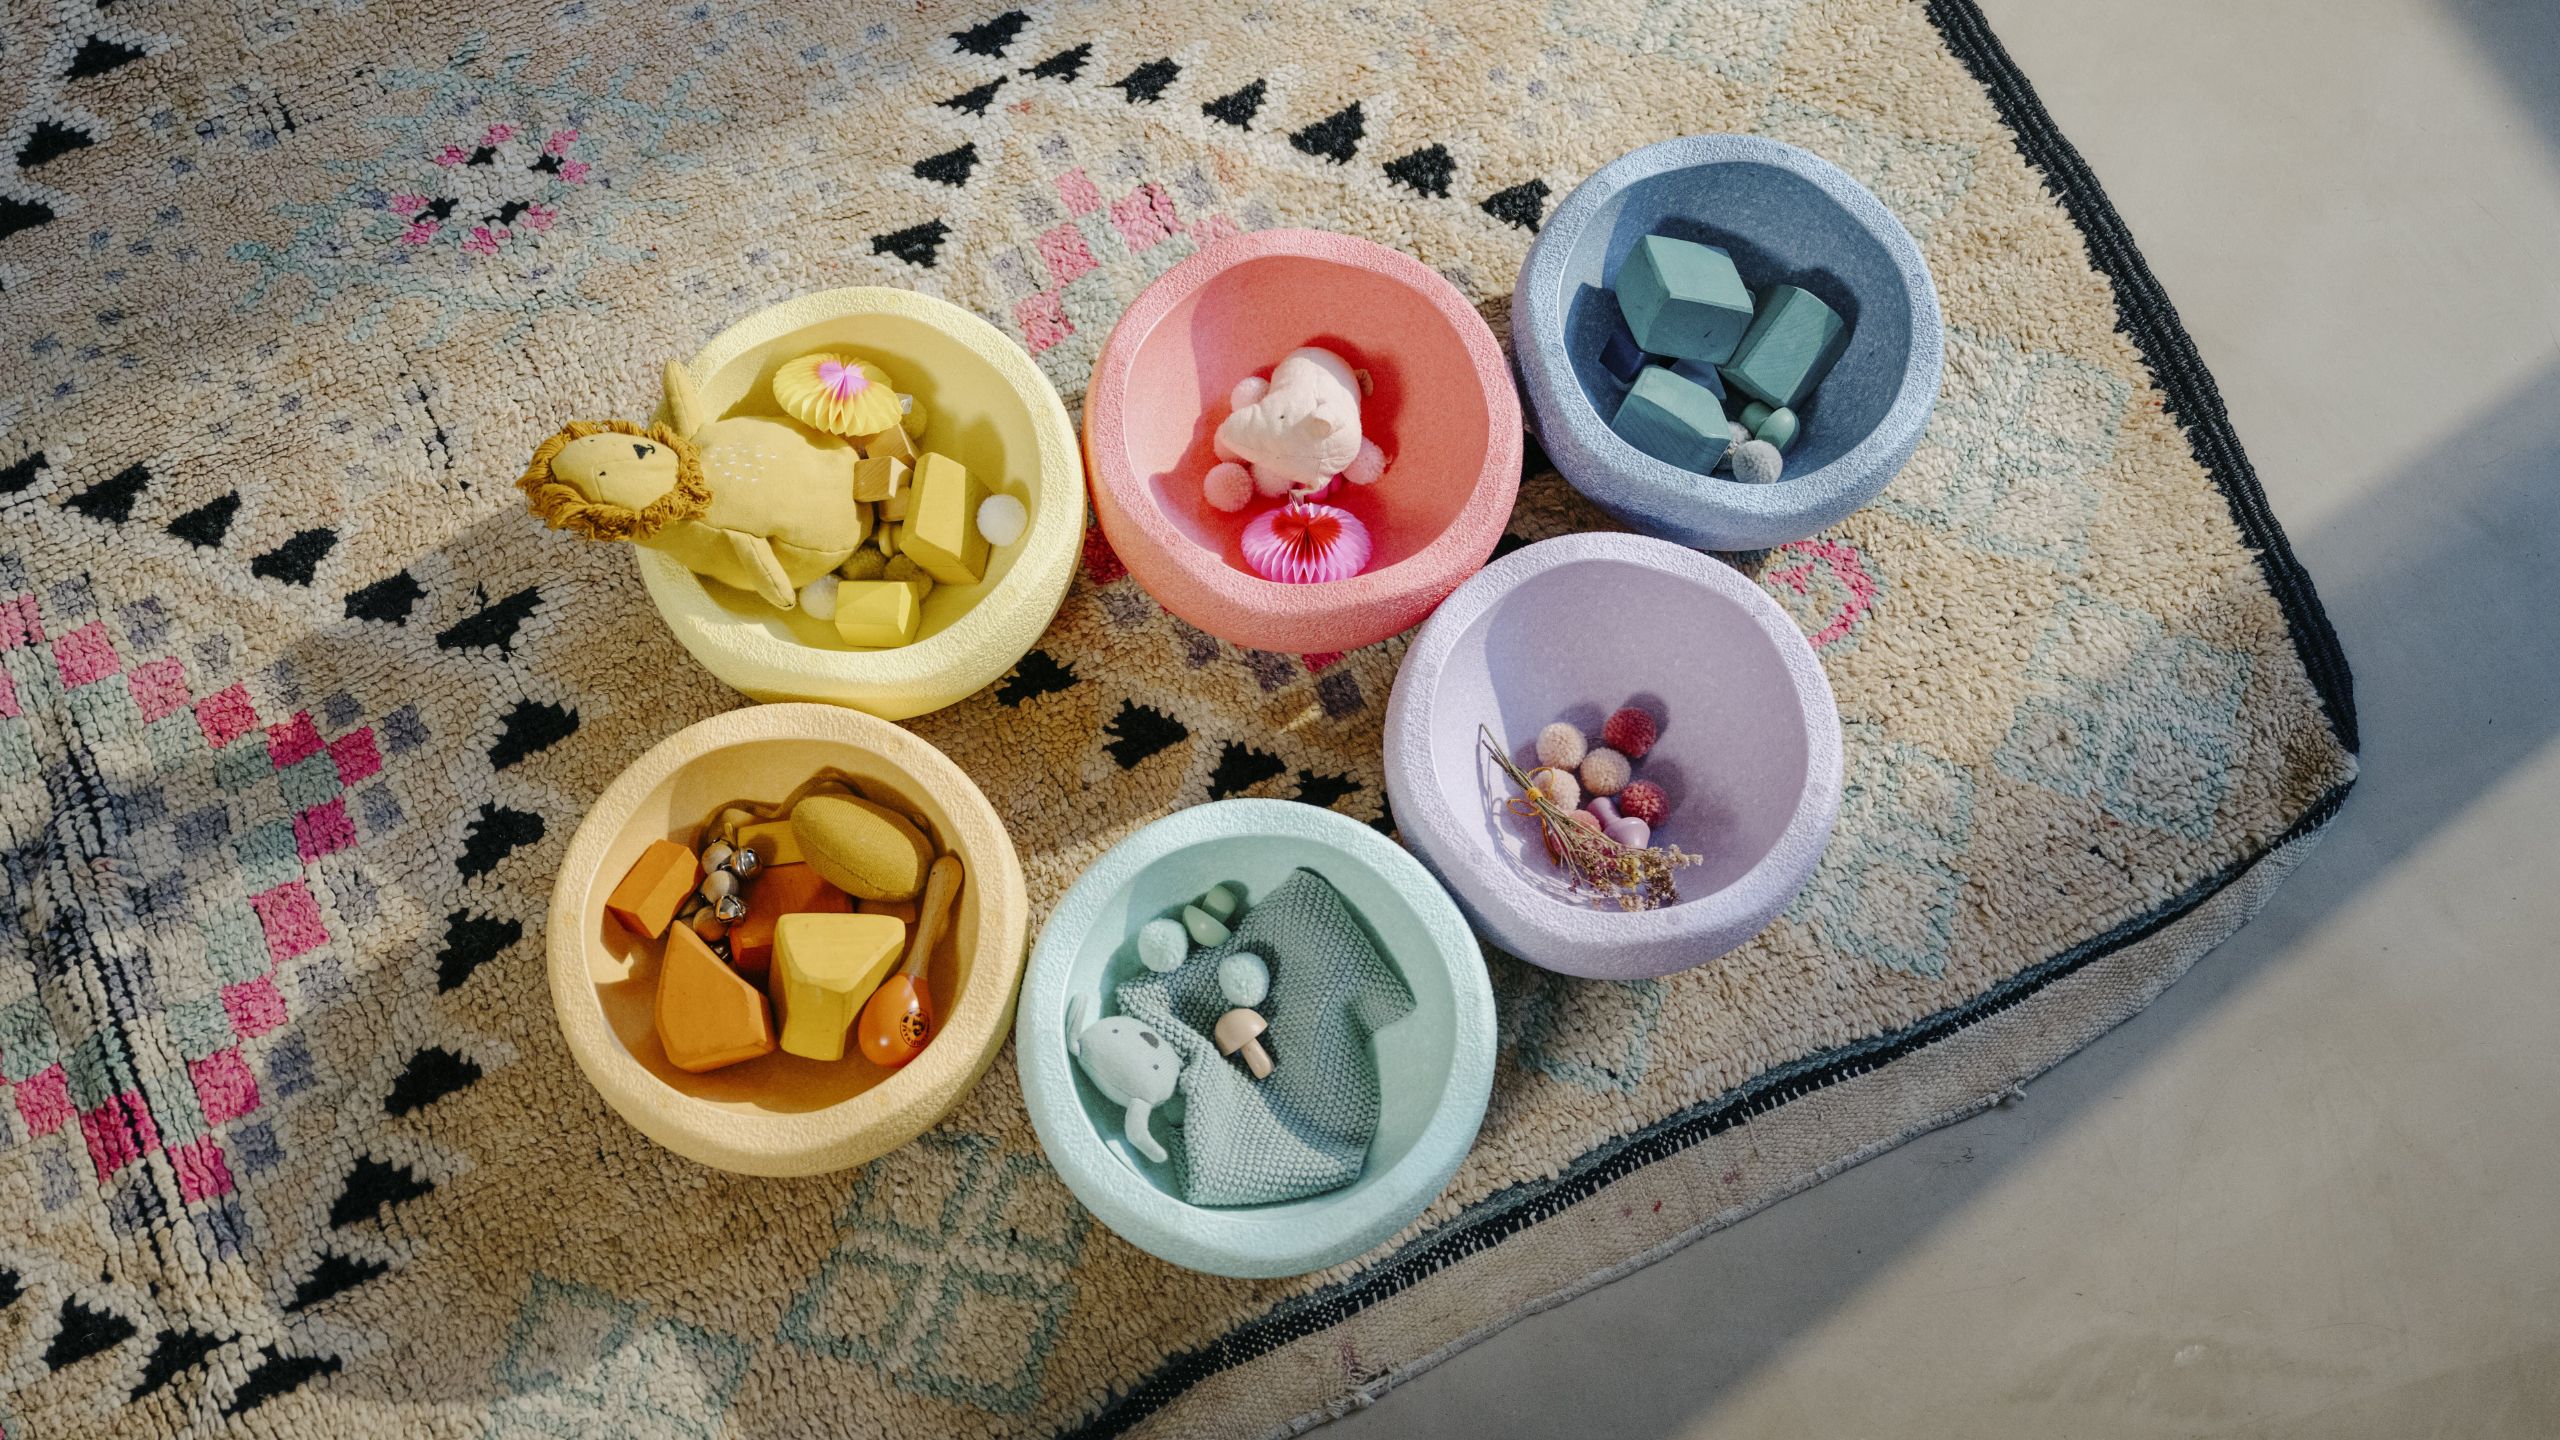 Stapelstein elements used as bowls for a sorting activity